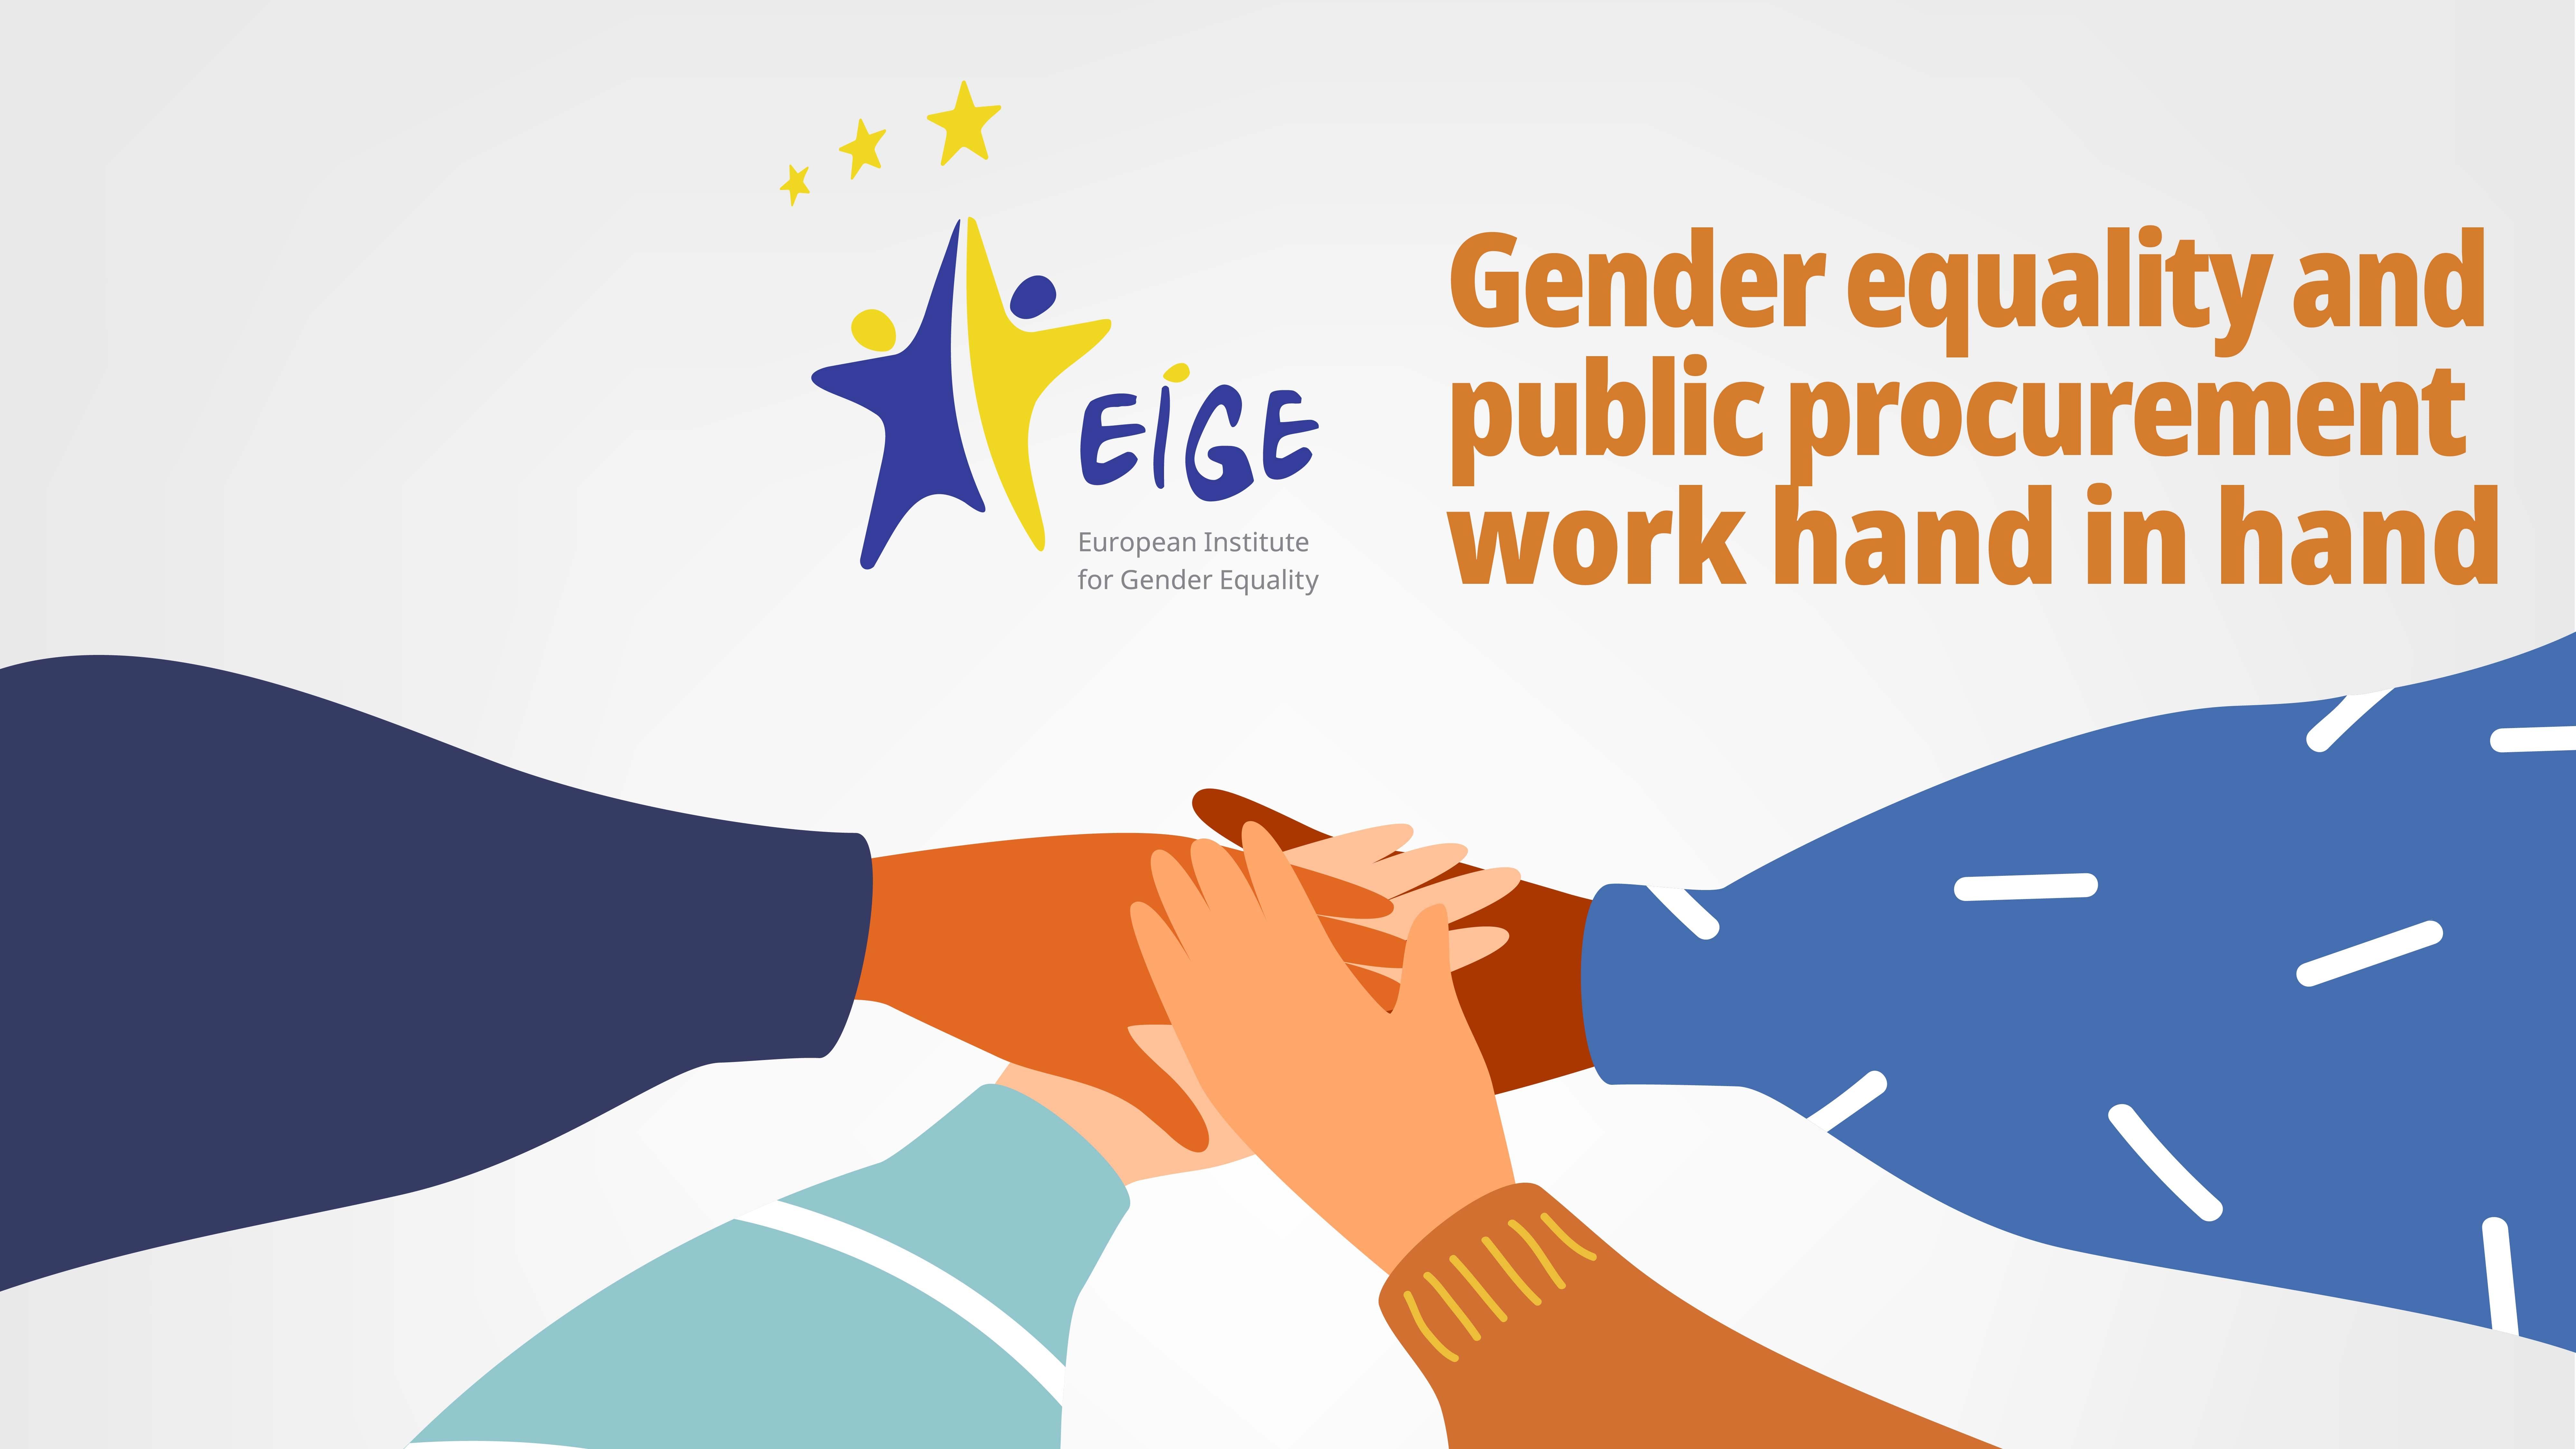 Illustrated hands holding each other next to a text "Gender equality and public procurement work hand in hand"